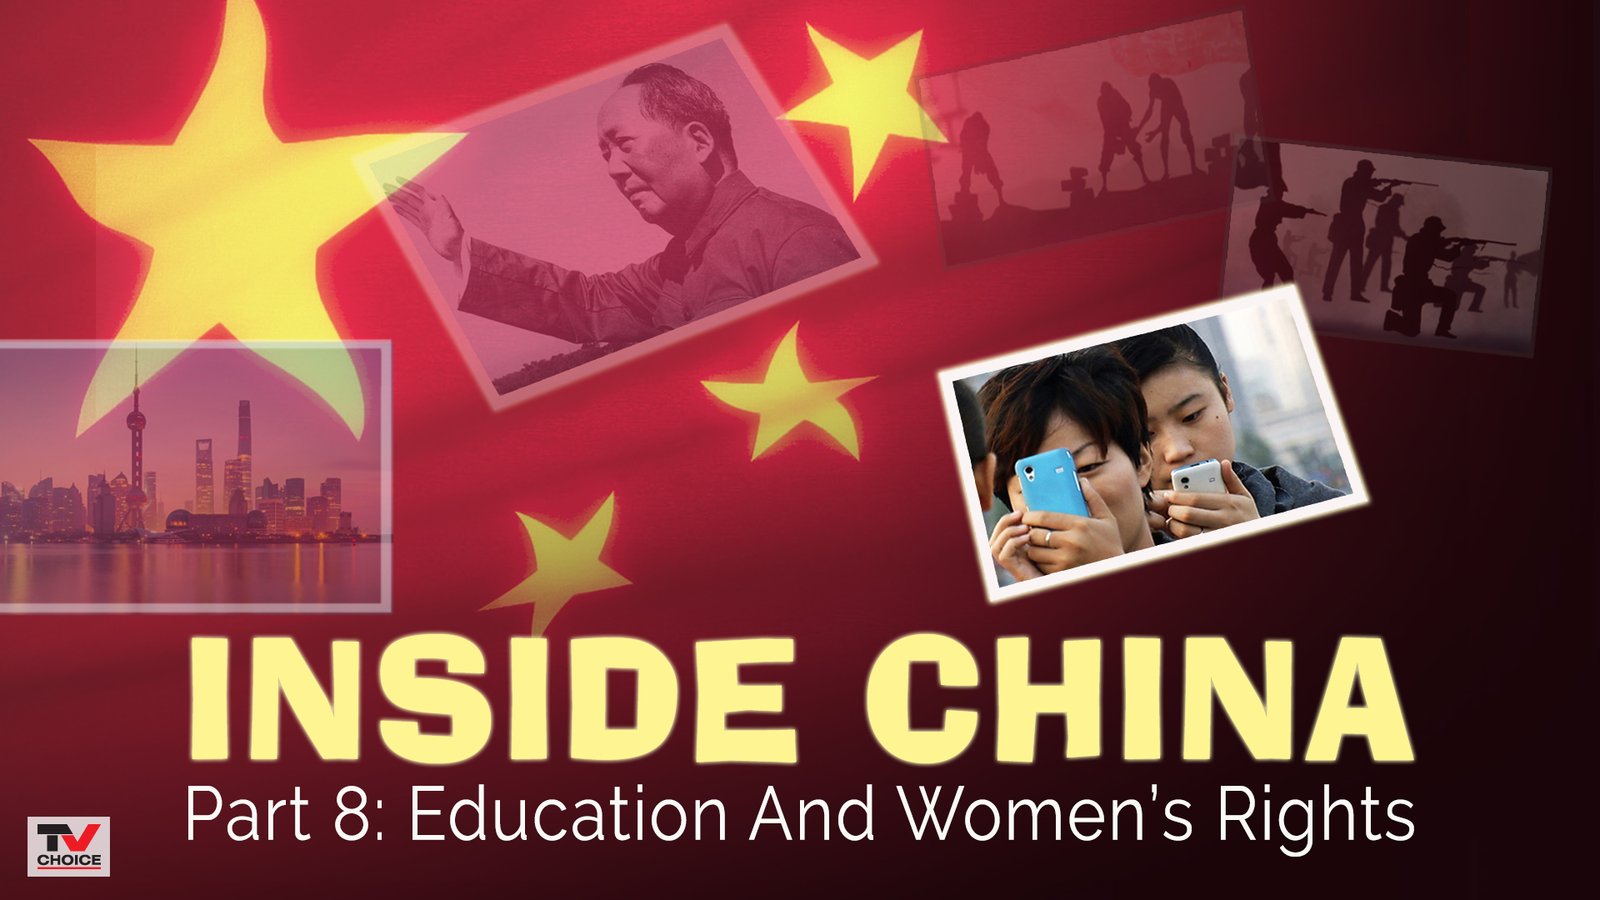 Inside China 8: Education And Women’s Rights